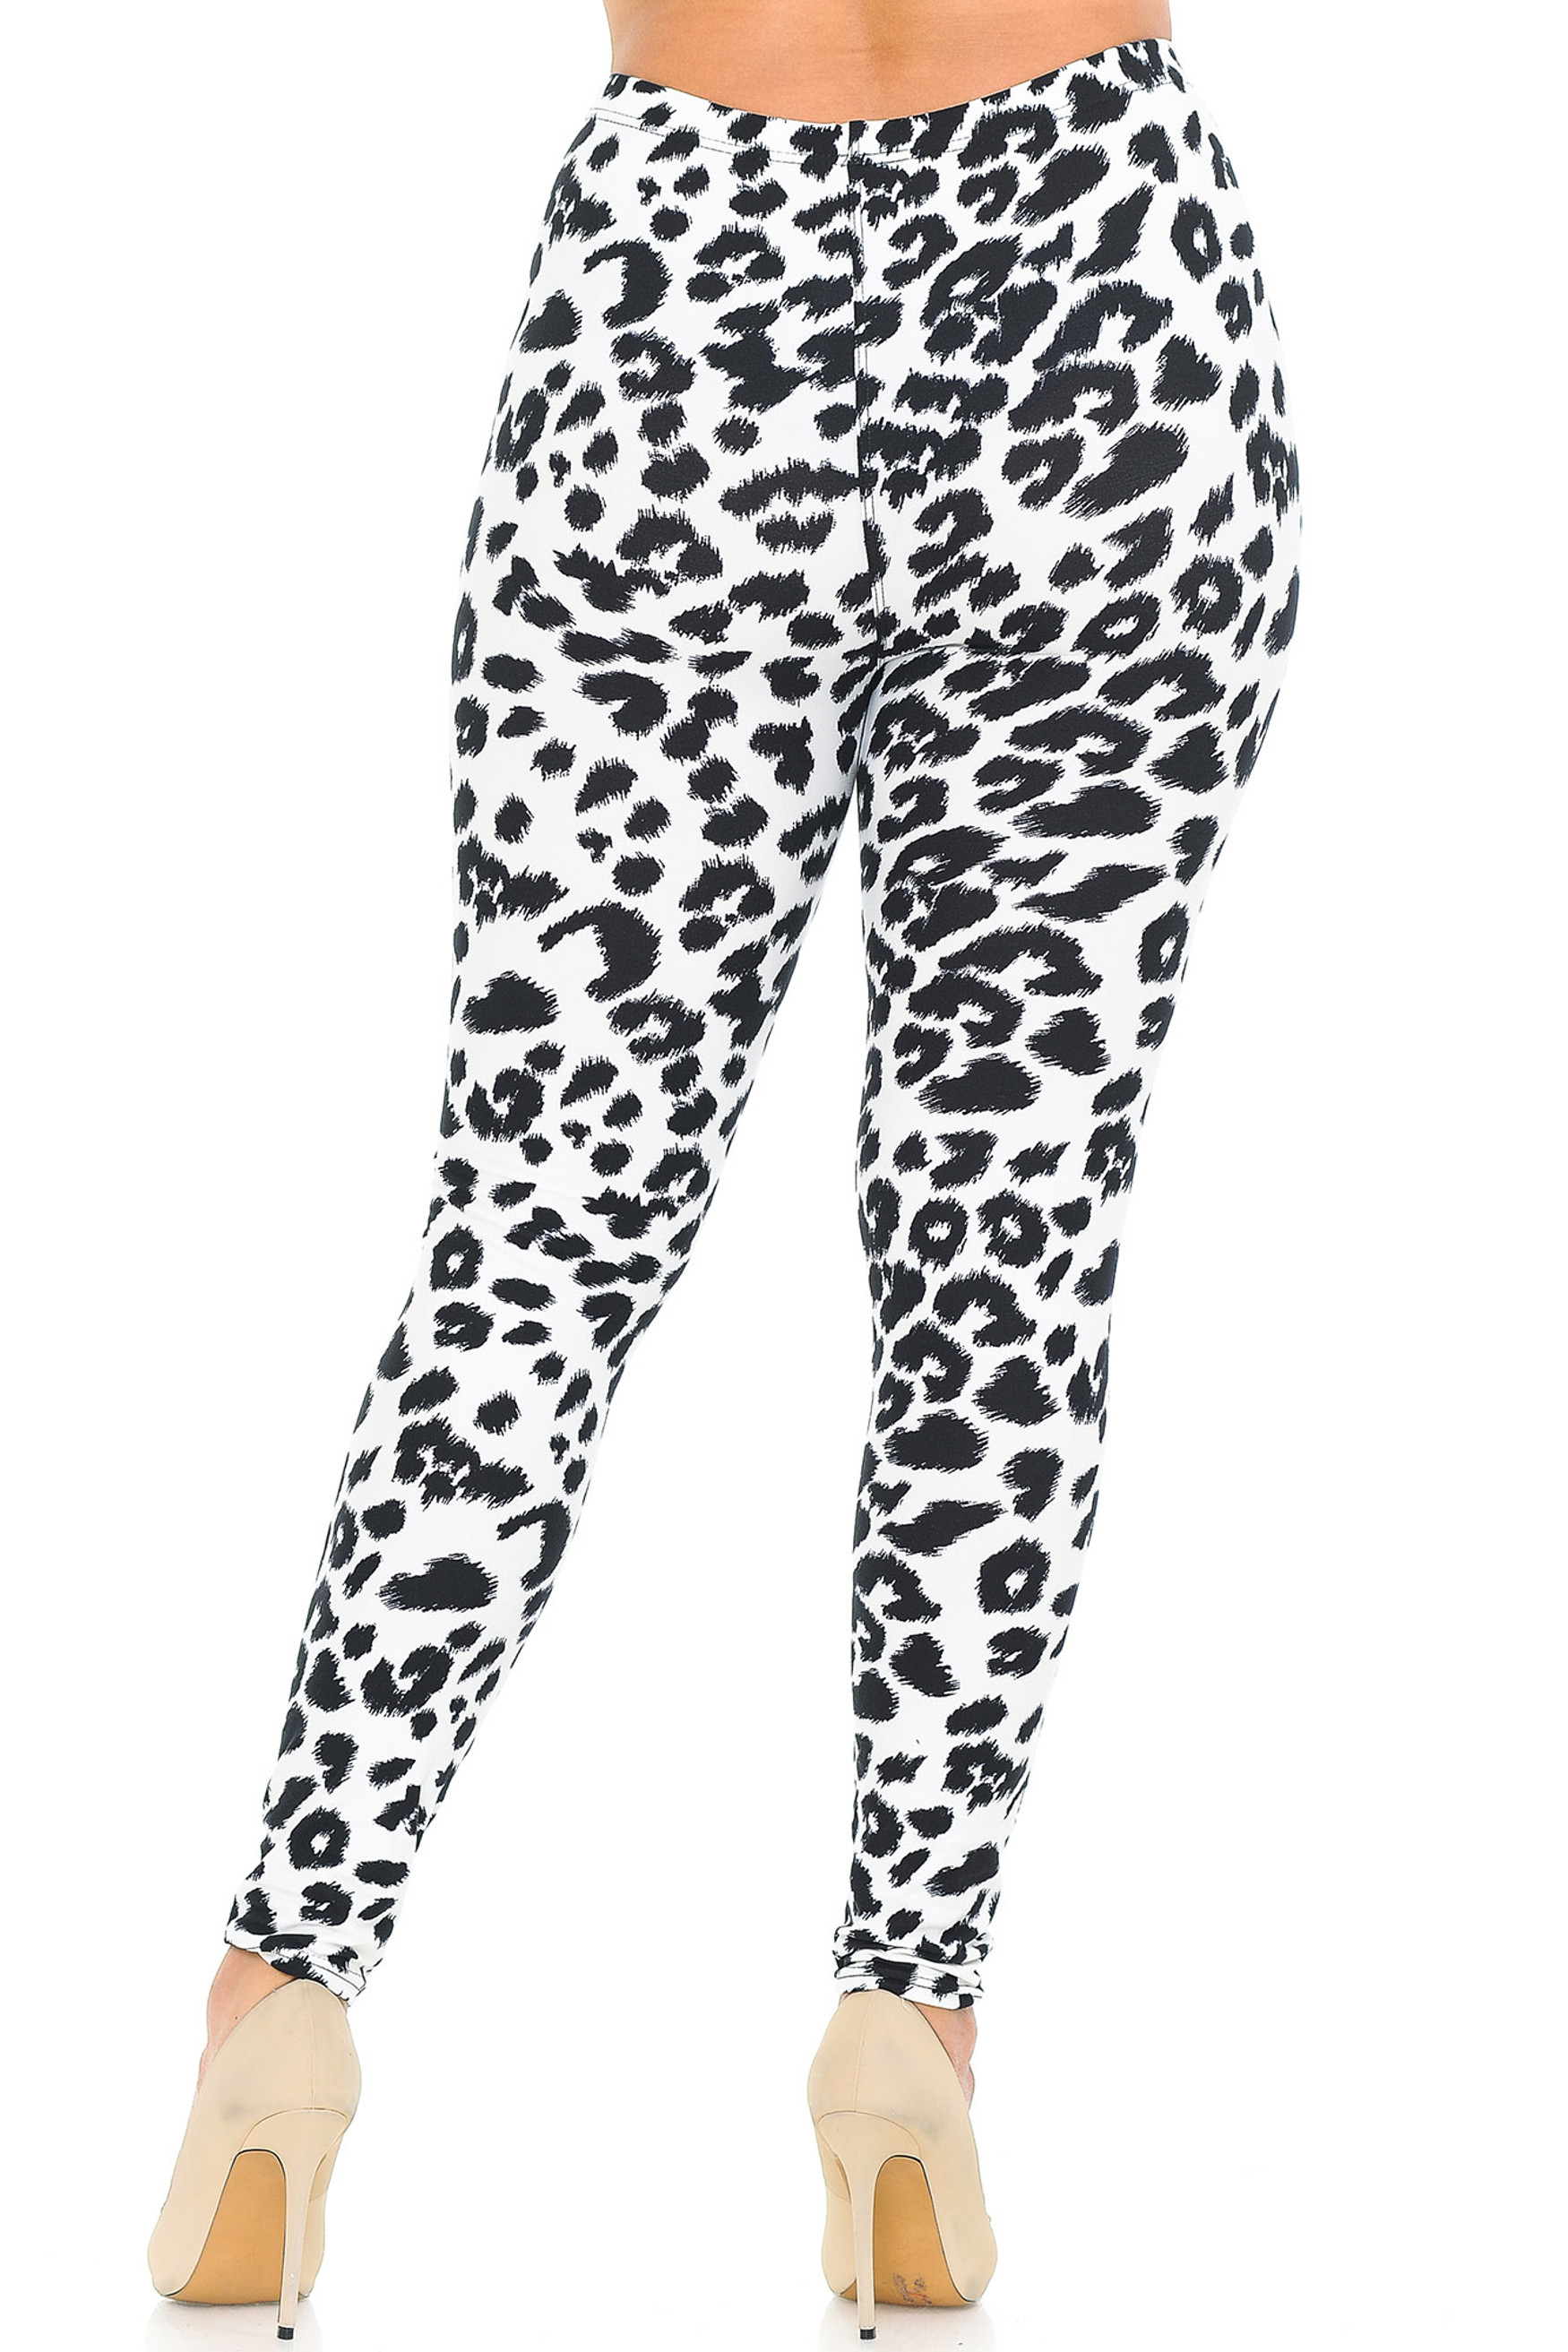 Soft Brushed Ivory Spotted Leopard Plus Size Leggings